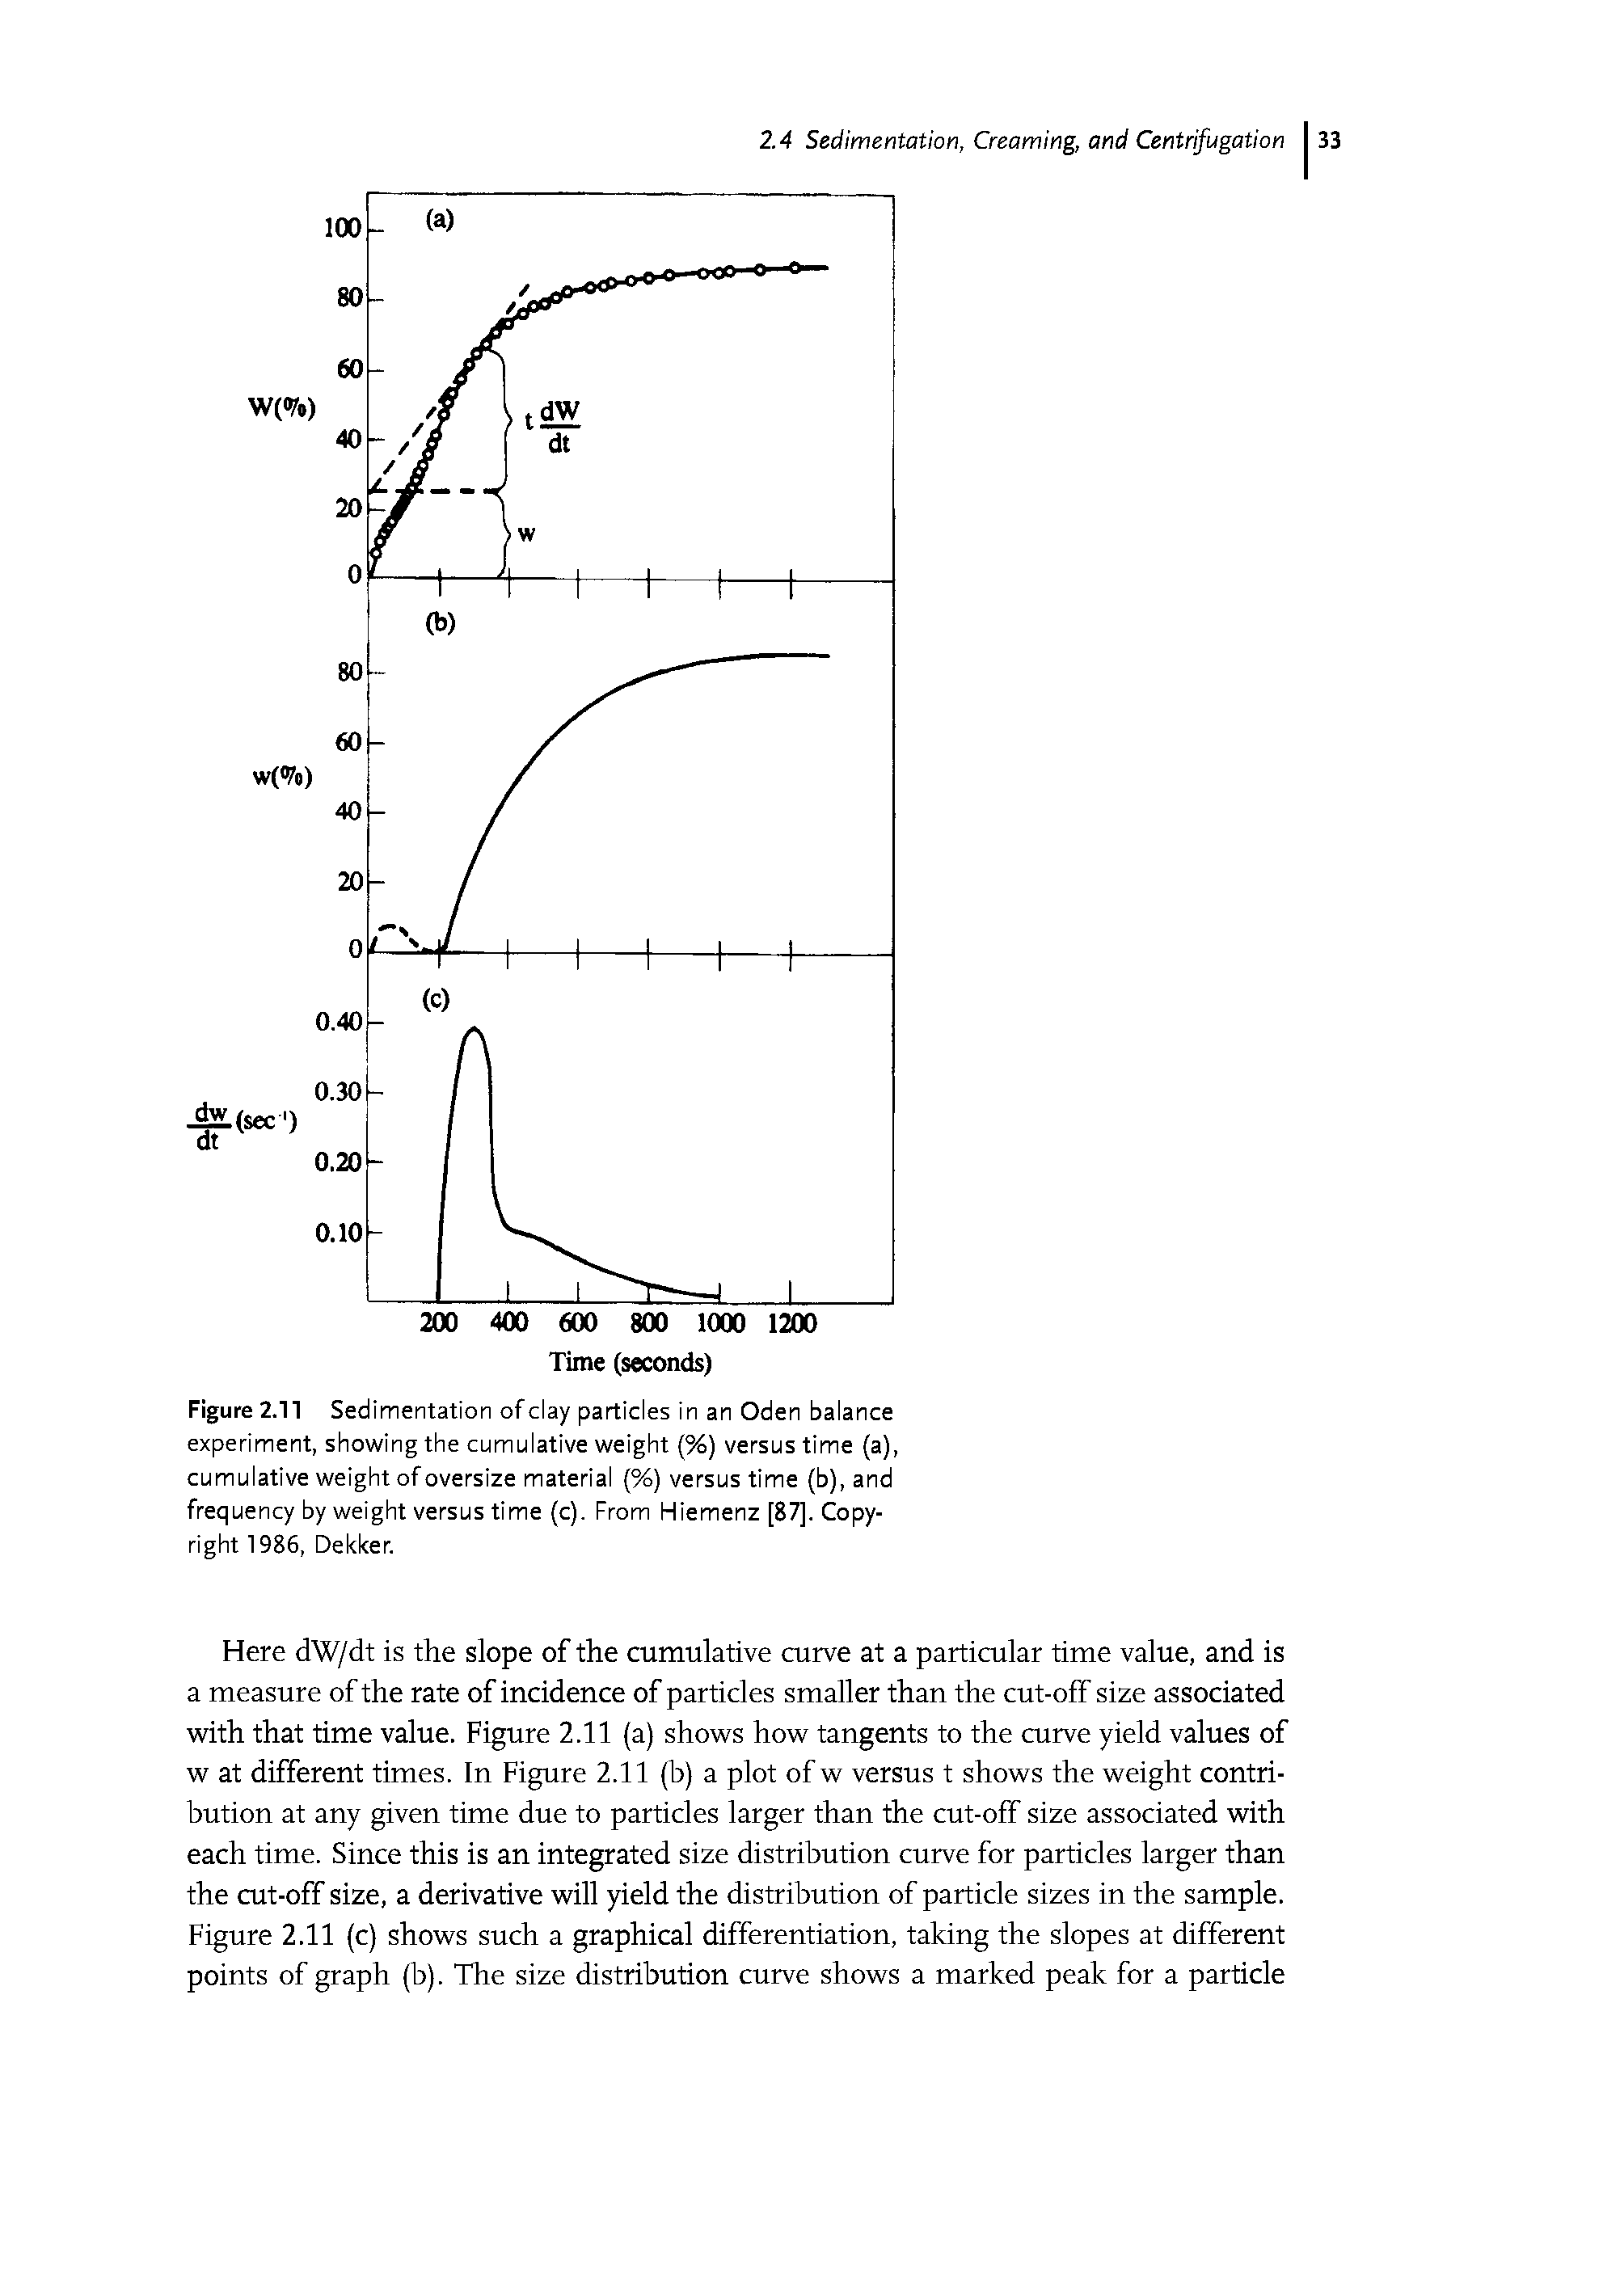 Figure 2.11 Sedimentation of clay particles in an Oden balance experiment, showing the cumulative weight (%) versus time (a), cumulative weight of oversize material (%) versus time (b), and frequency by weight versus time (c). From Hiemenz [87]. Copyright 1986, Dekker.